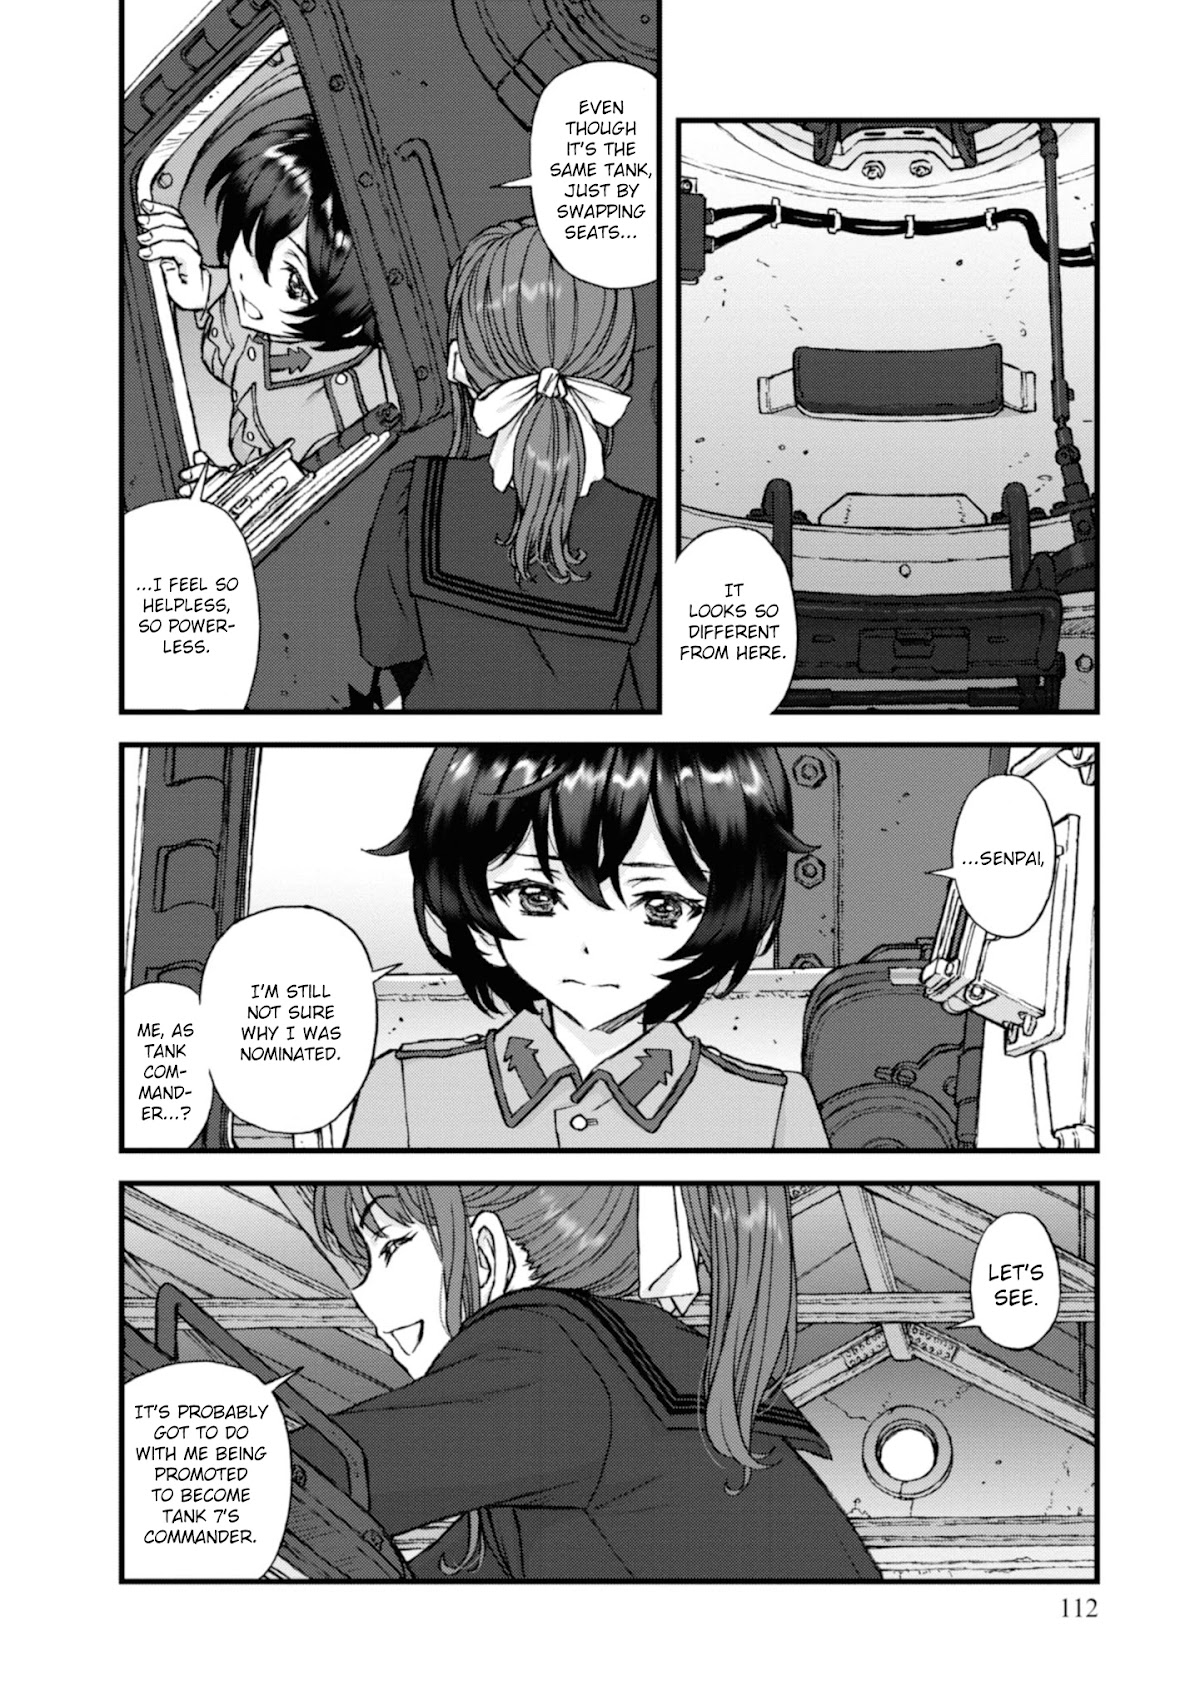 Girls Und Panzer - The Fir Tree And The Iron-Winged Witch - Page 1